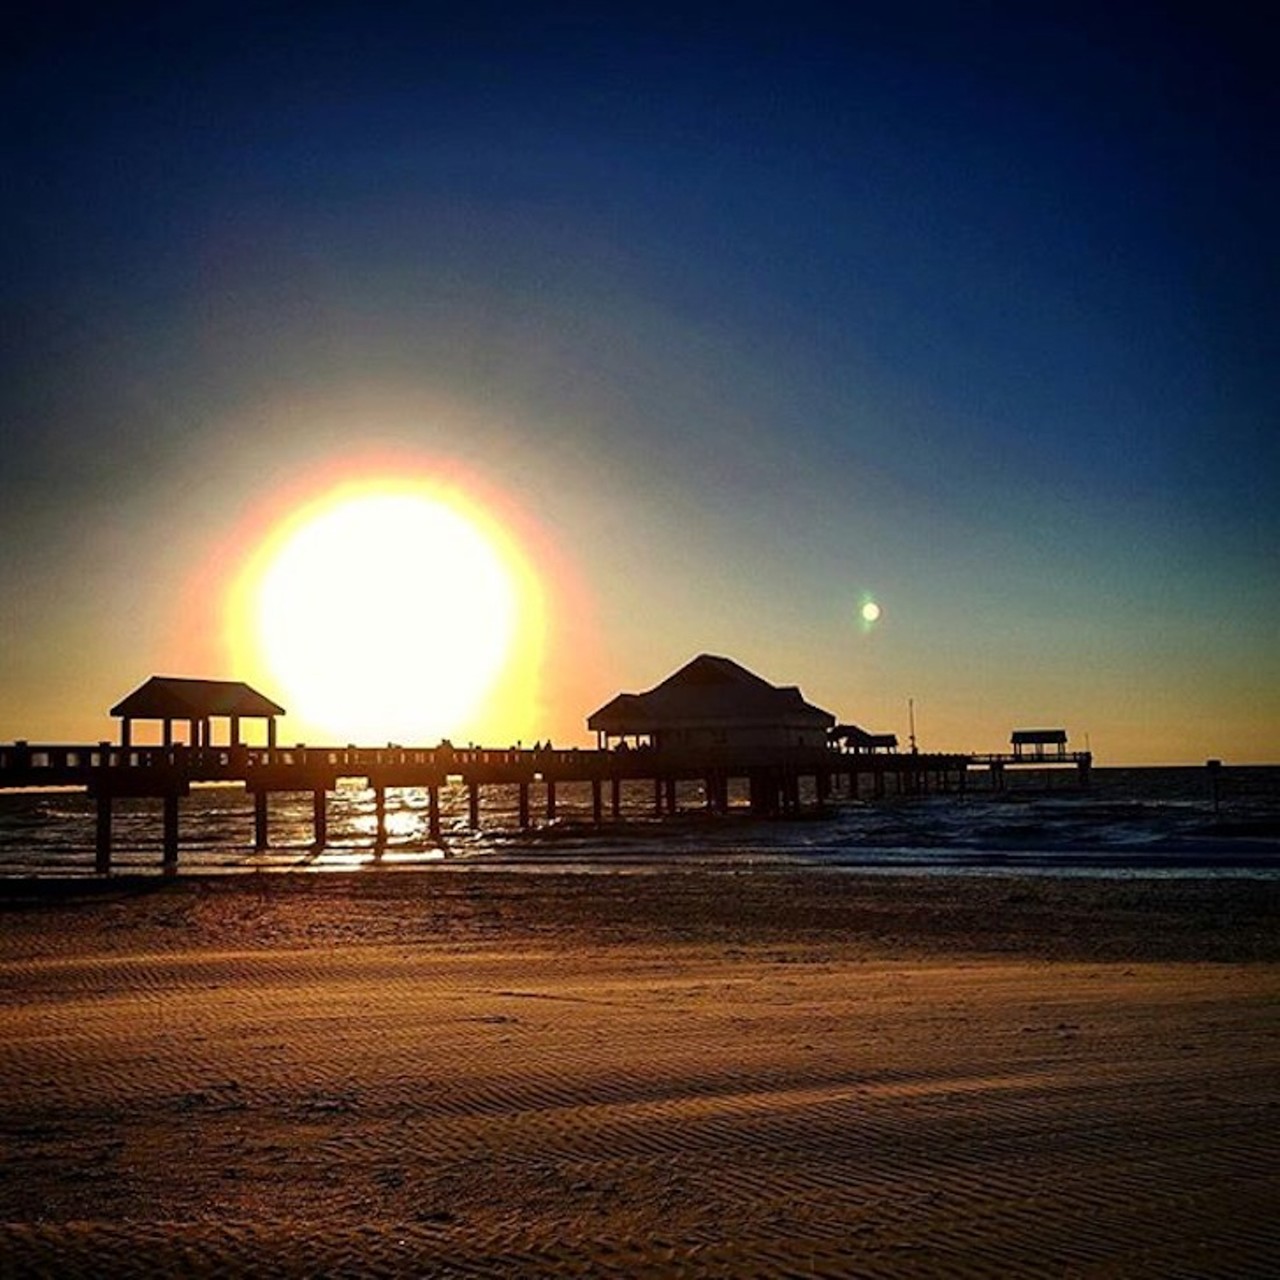 Clearwater Beach
Recently named the #1 beach in the country by Trip Advisor, Clearwater is well-known for its pristine condition. Keep the adrenaline up with a jetski ride or fly high with some parasailing. If mellow yellow is more your vibe, head to the boardwalk and go fishing.
2 hours and 20 minutes
Photo via icarussailingmedia/Instagram